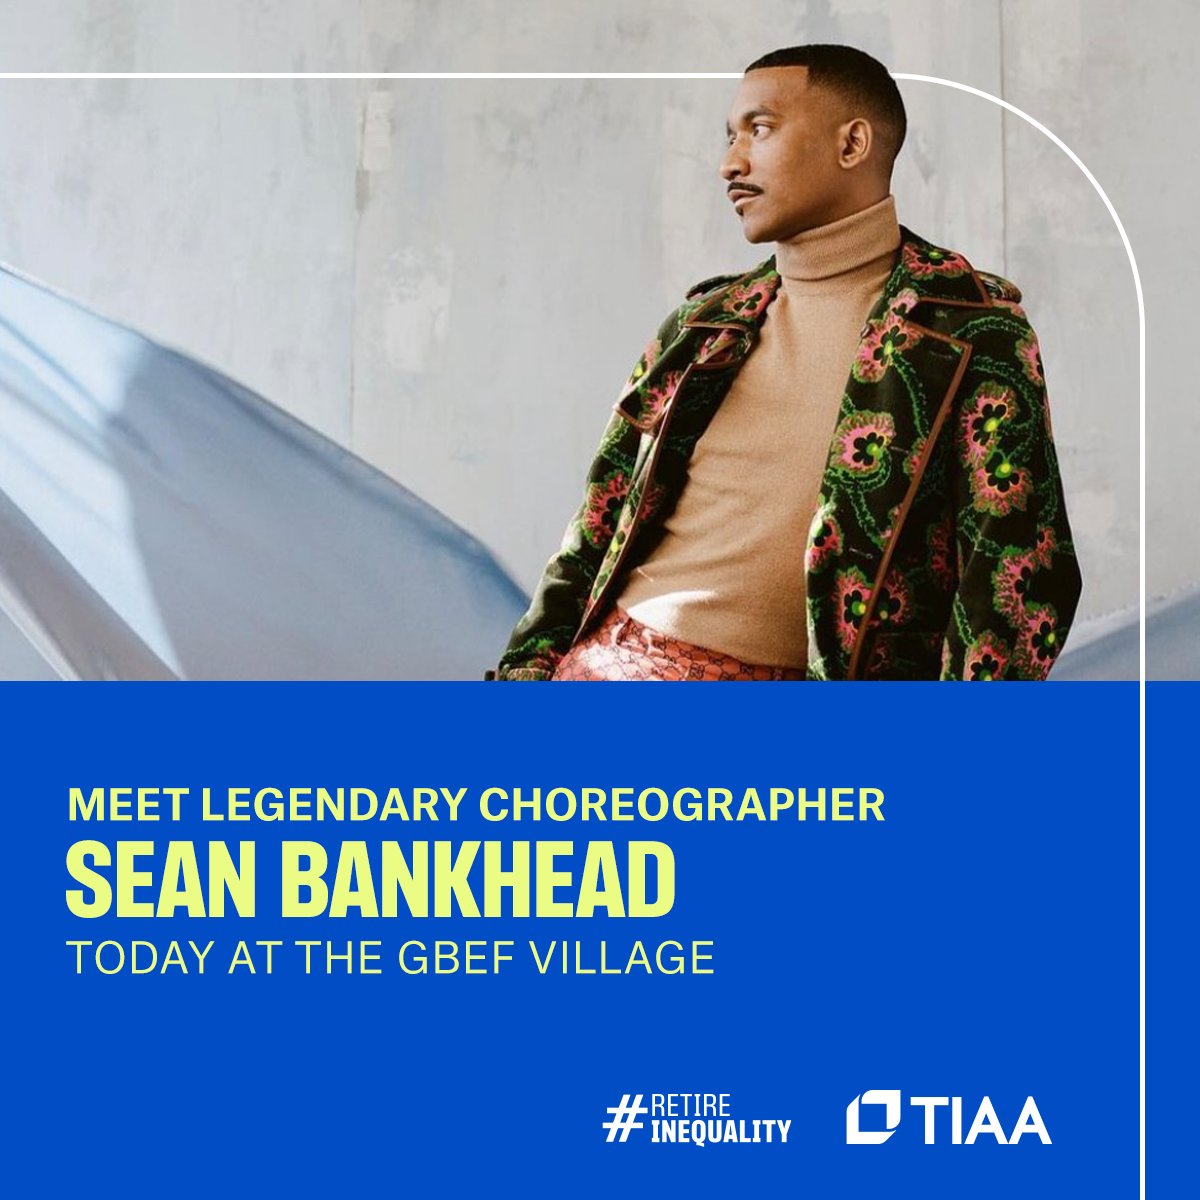 The moves to create your legacy aren't as daunting as you'd think. Take a step with Sean Bankhead at @TIAA's EFOC Legacy Makers Studio #EFPartner retireinequality.com